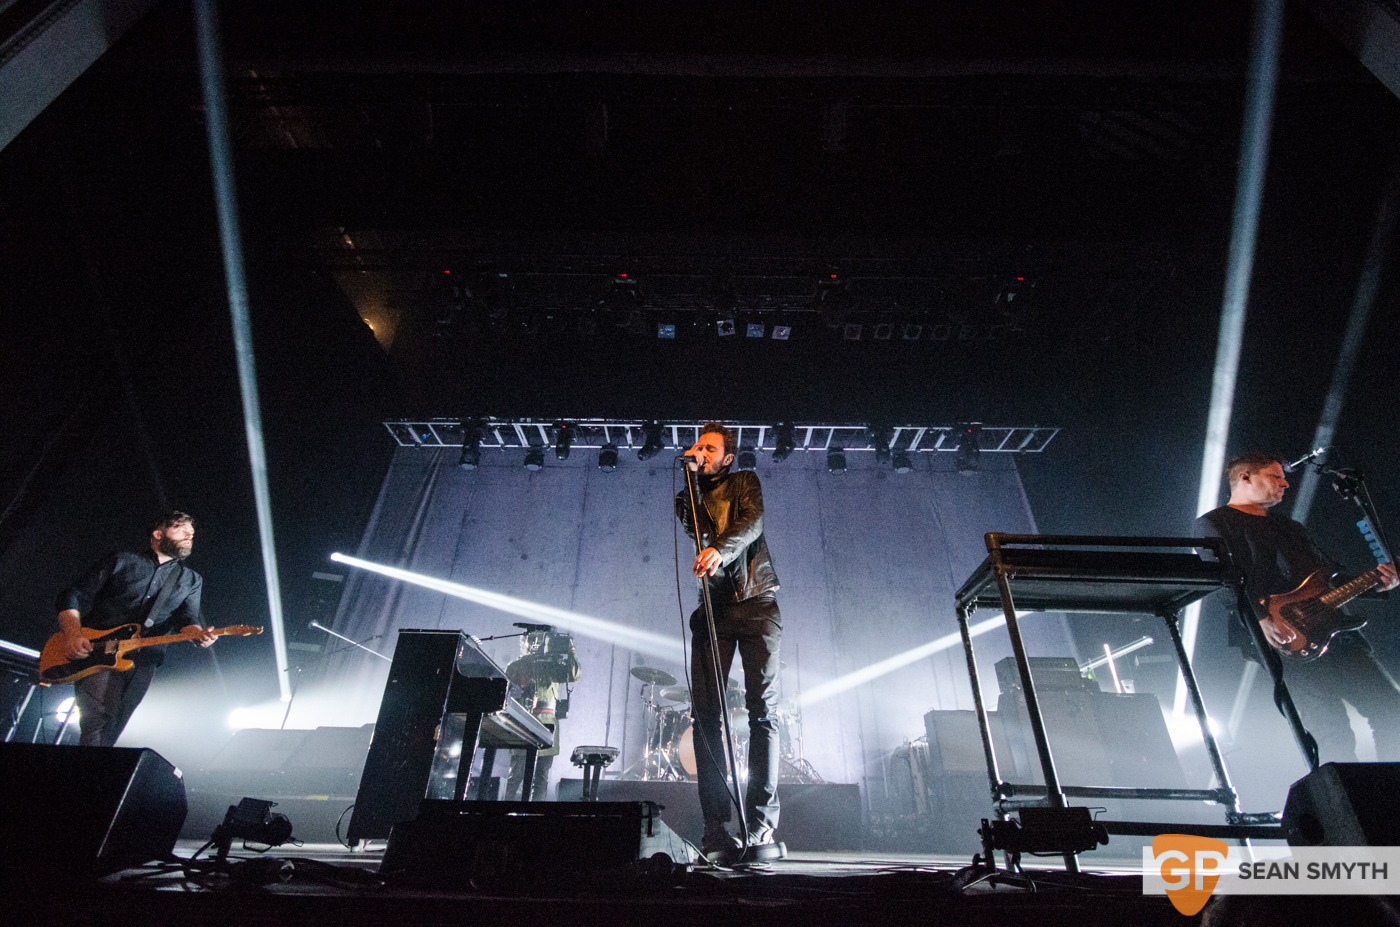 editors-at-the-olympia-theatre-by-sean-smyth-10-10-15-24-of-28_22090440605_o